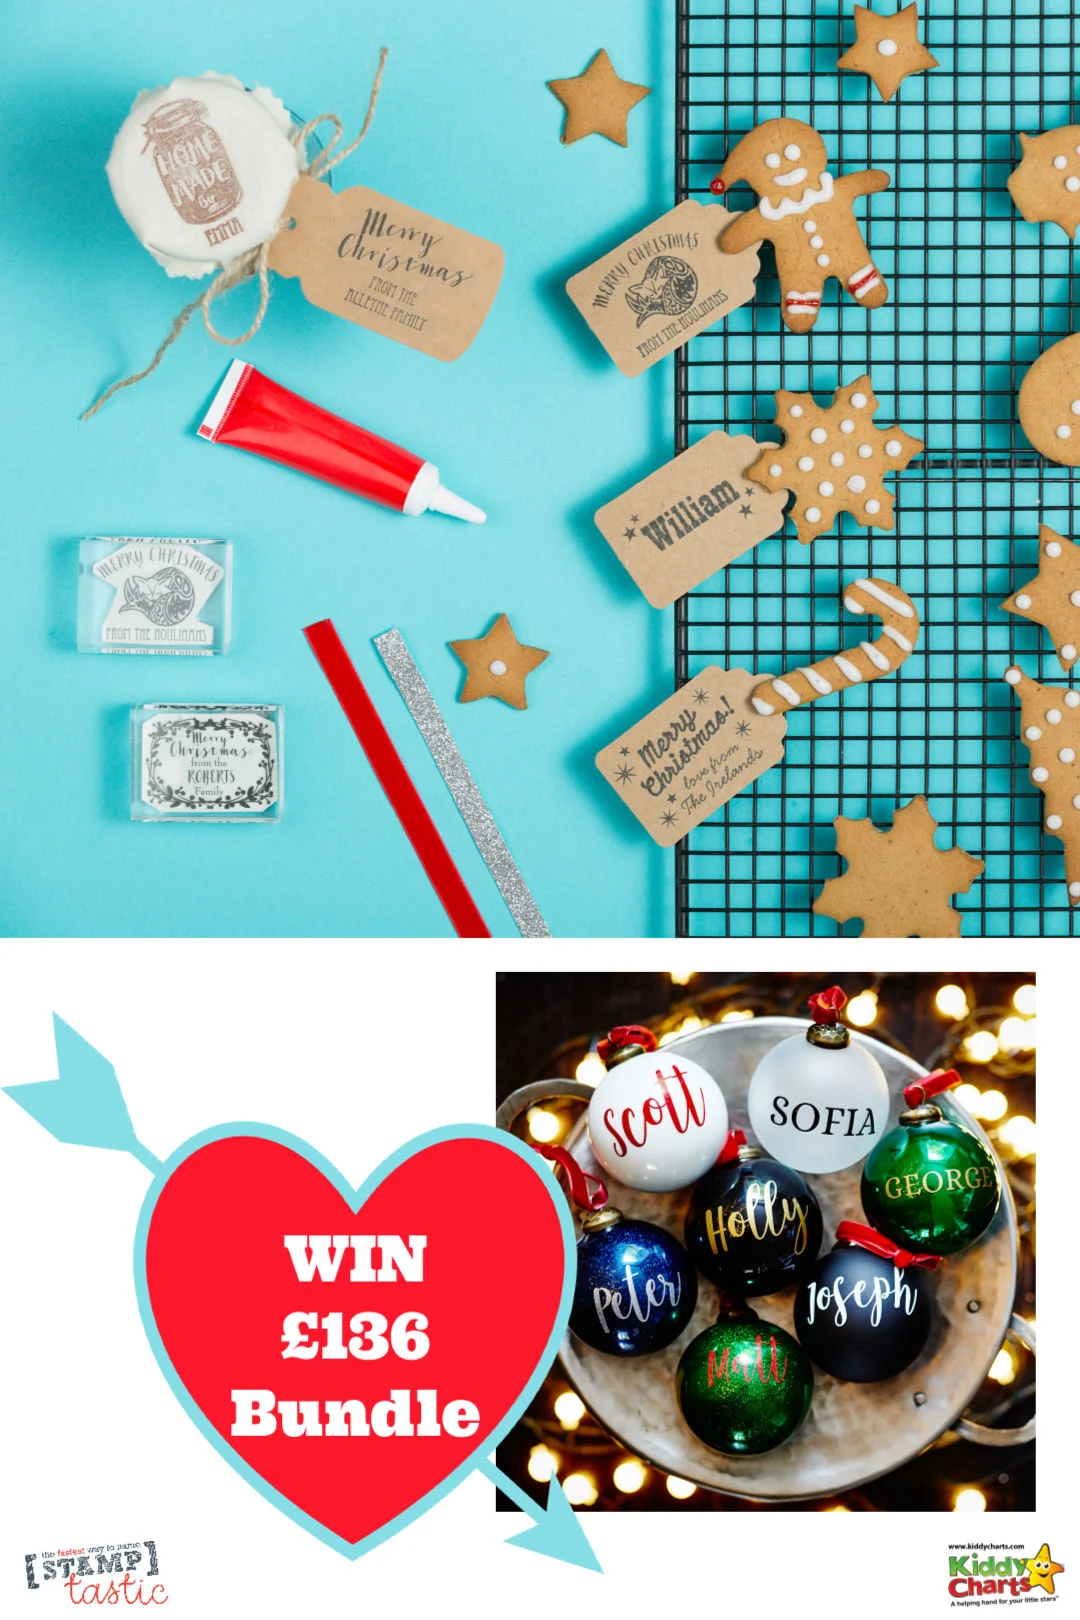 Win £136 of goodies from Stamptastic for a fabulous personalised Christmas! #giveaways #win #christmas